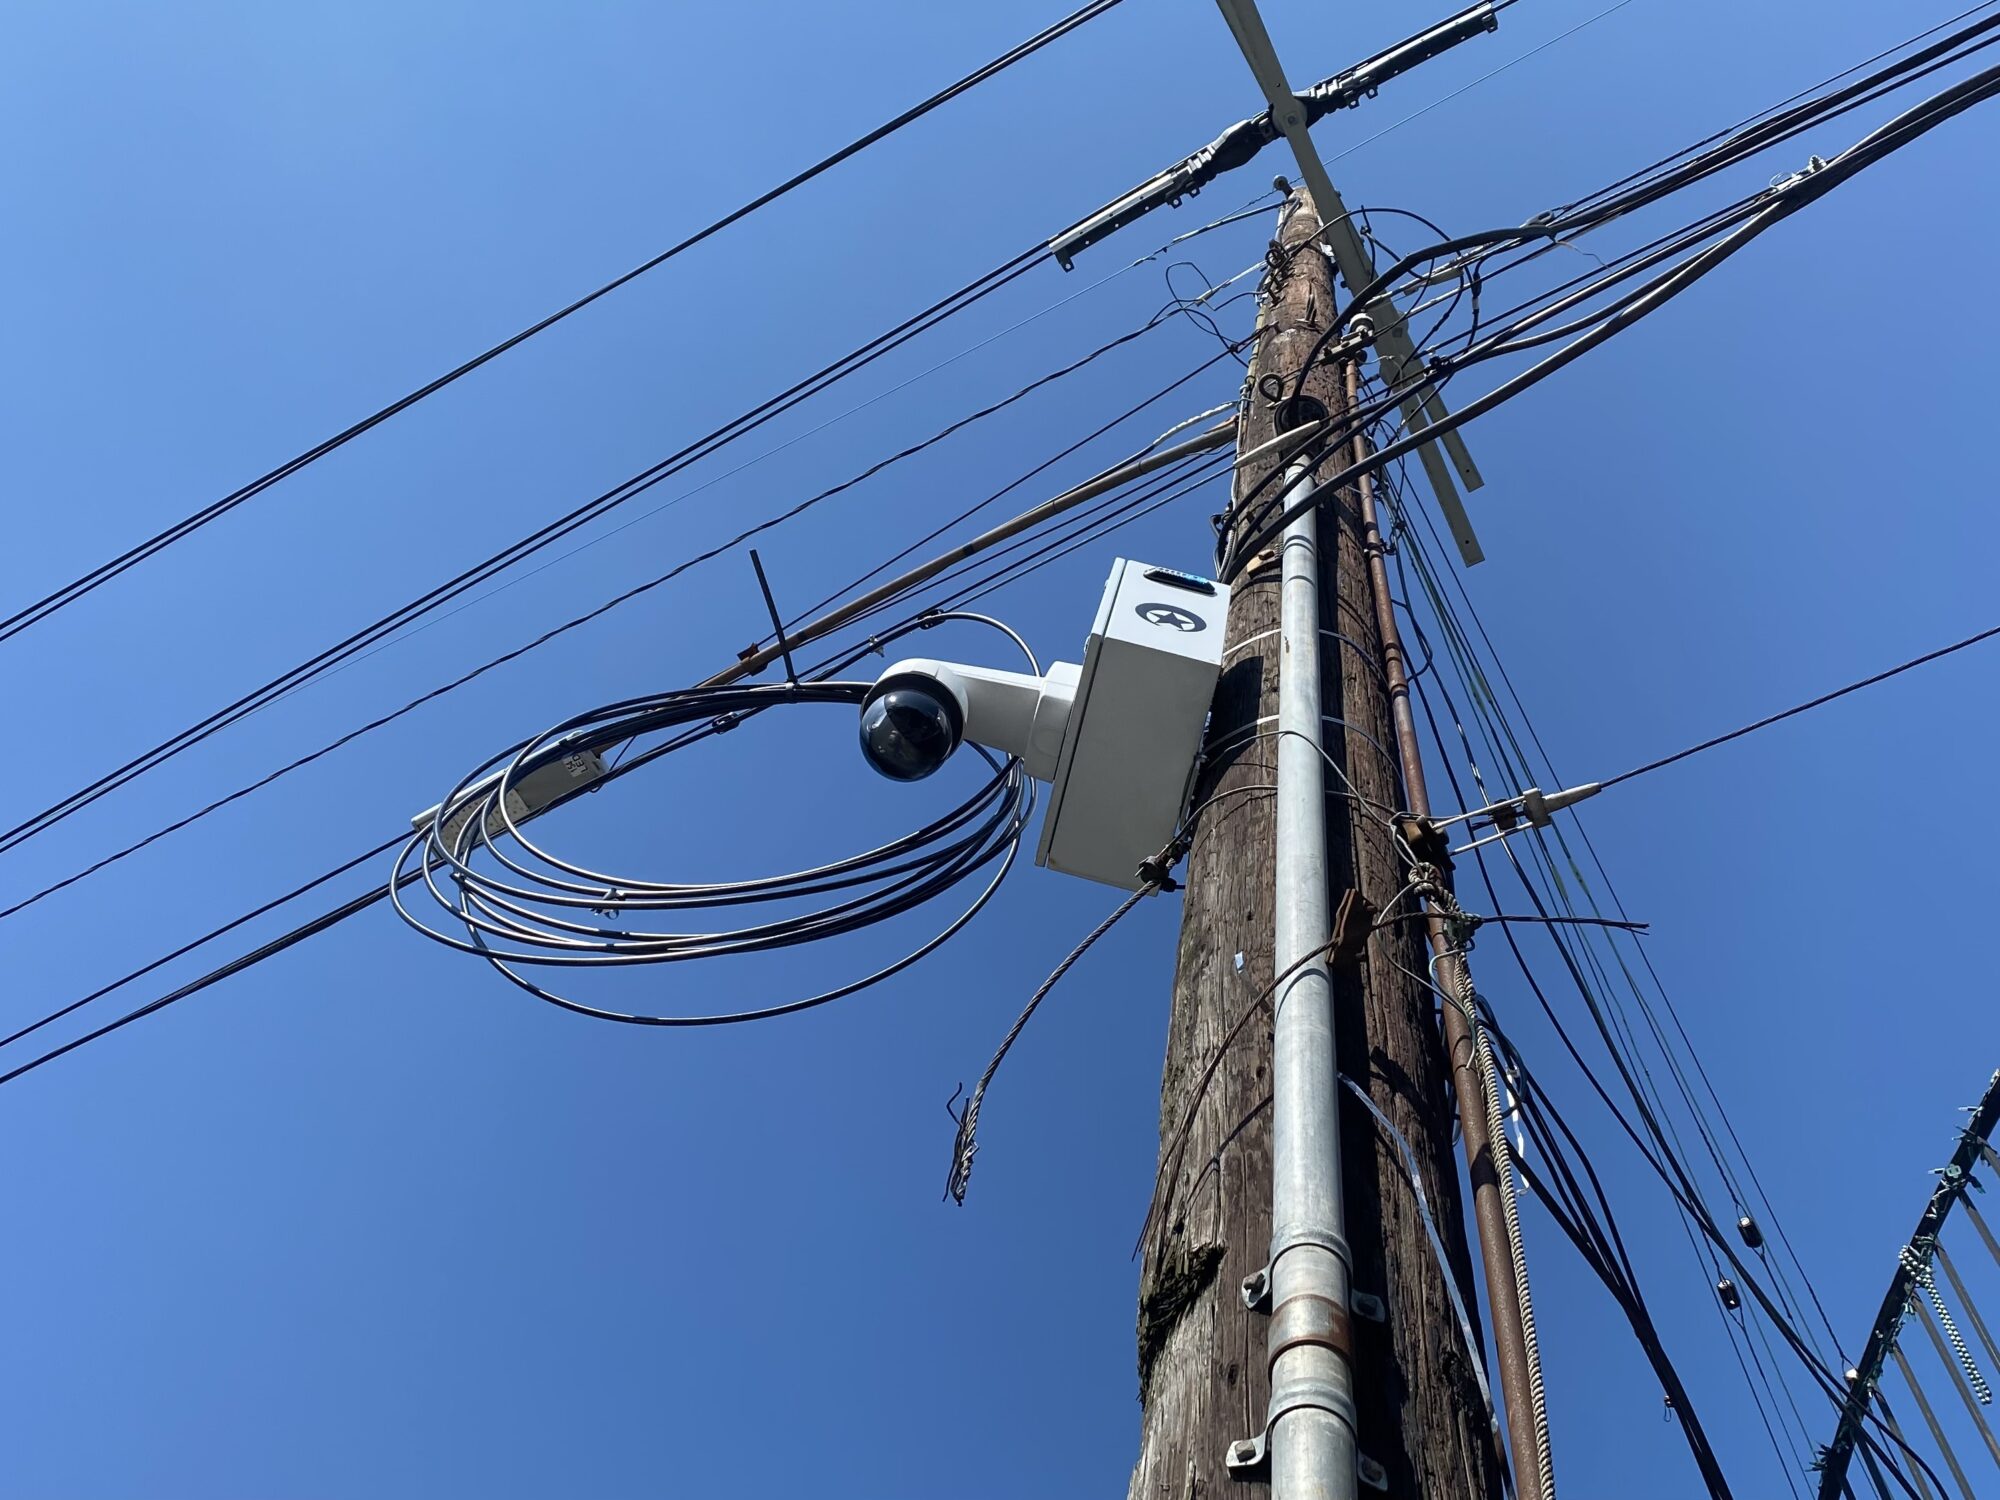 A photograph, taken from the street level, of a police surveillance camera: a black glass sphere attached to a white steel armature, itself attached to a wooden telephone pole